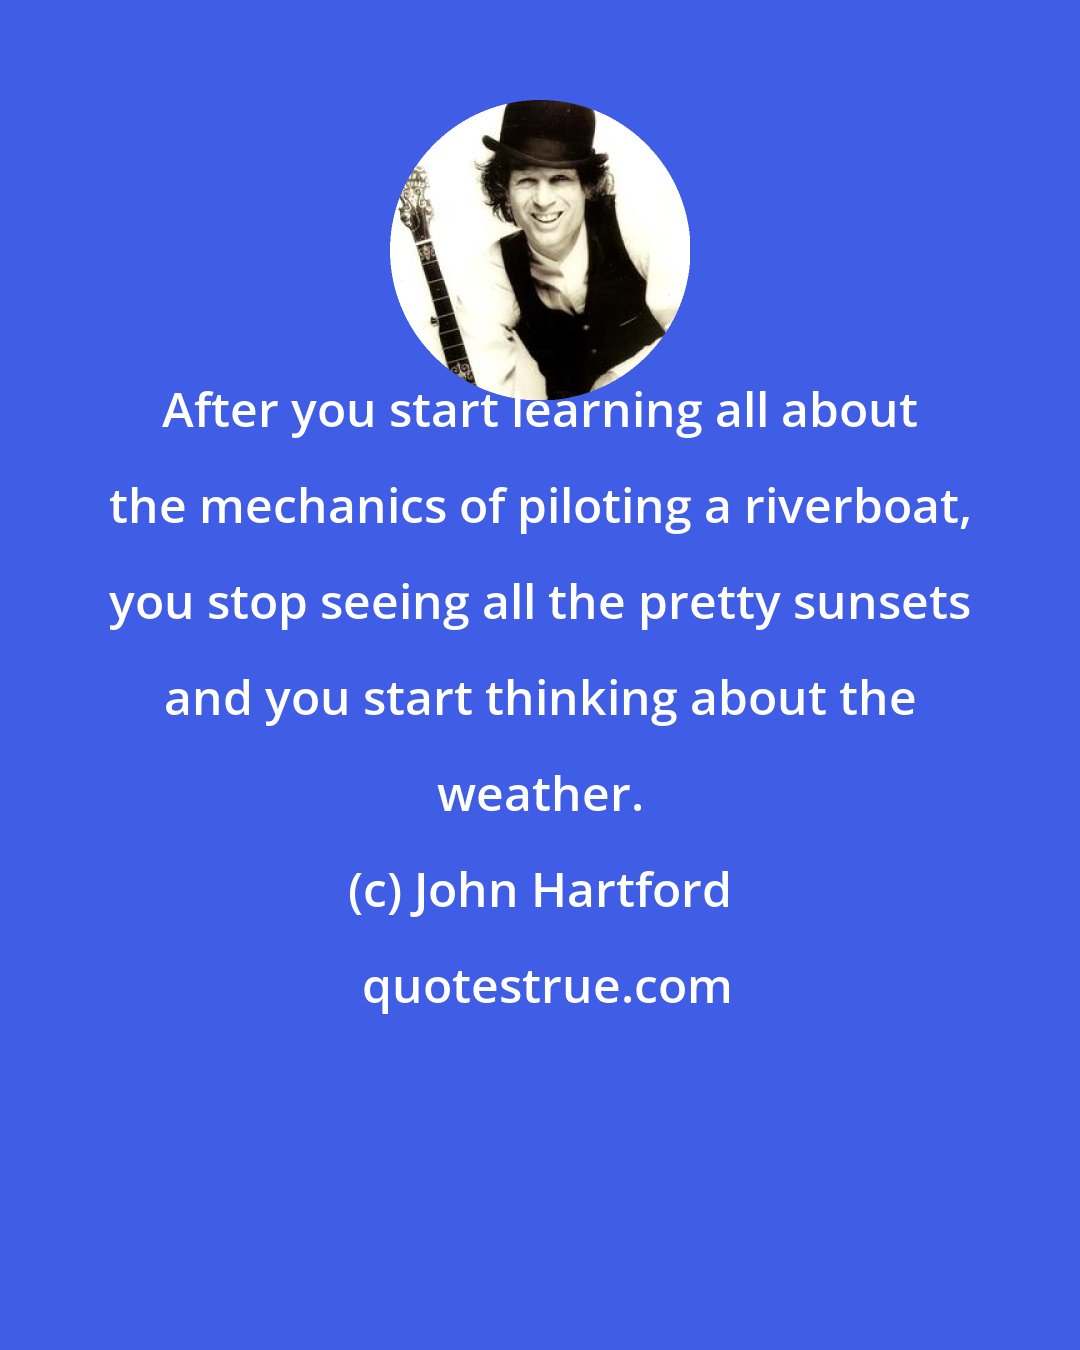 John Hartford: After you start learning all about the mechanics of piloting a riverboat, you stop seeing all the pretty sunsets and you start thinking about the weather.